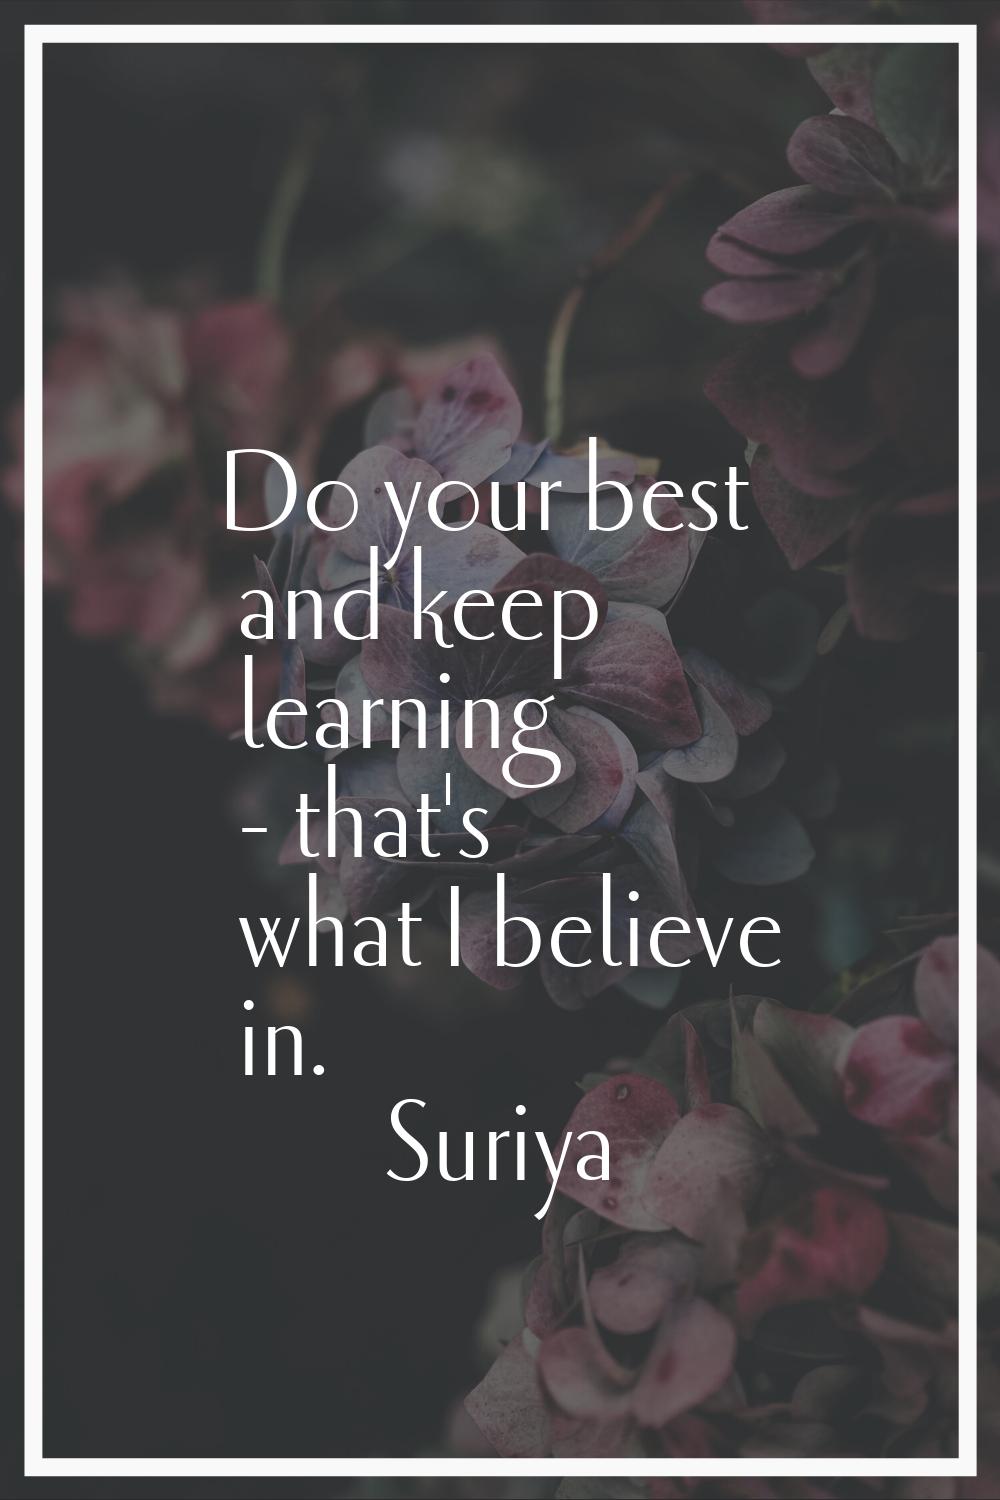 Do your best and keep learning - that's what I believe in.